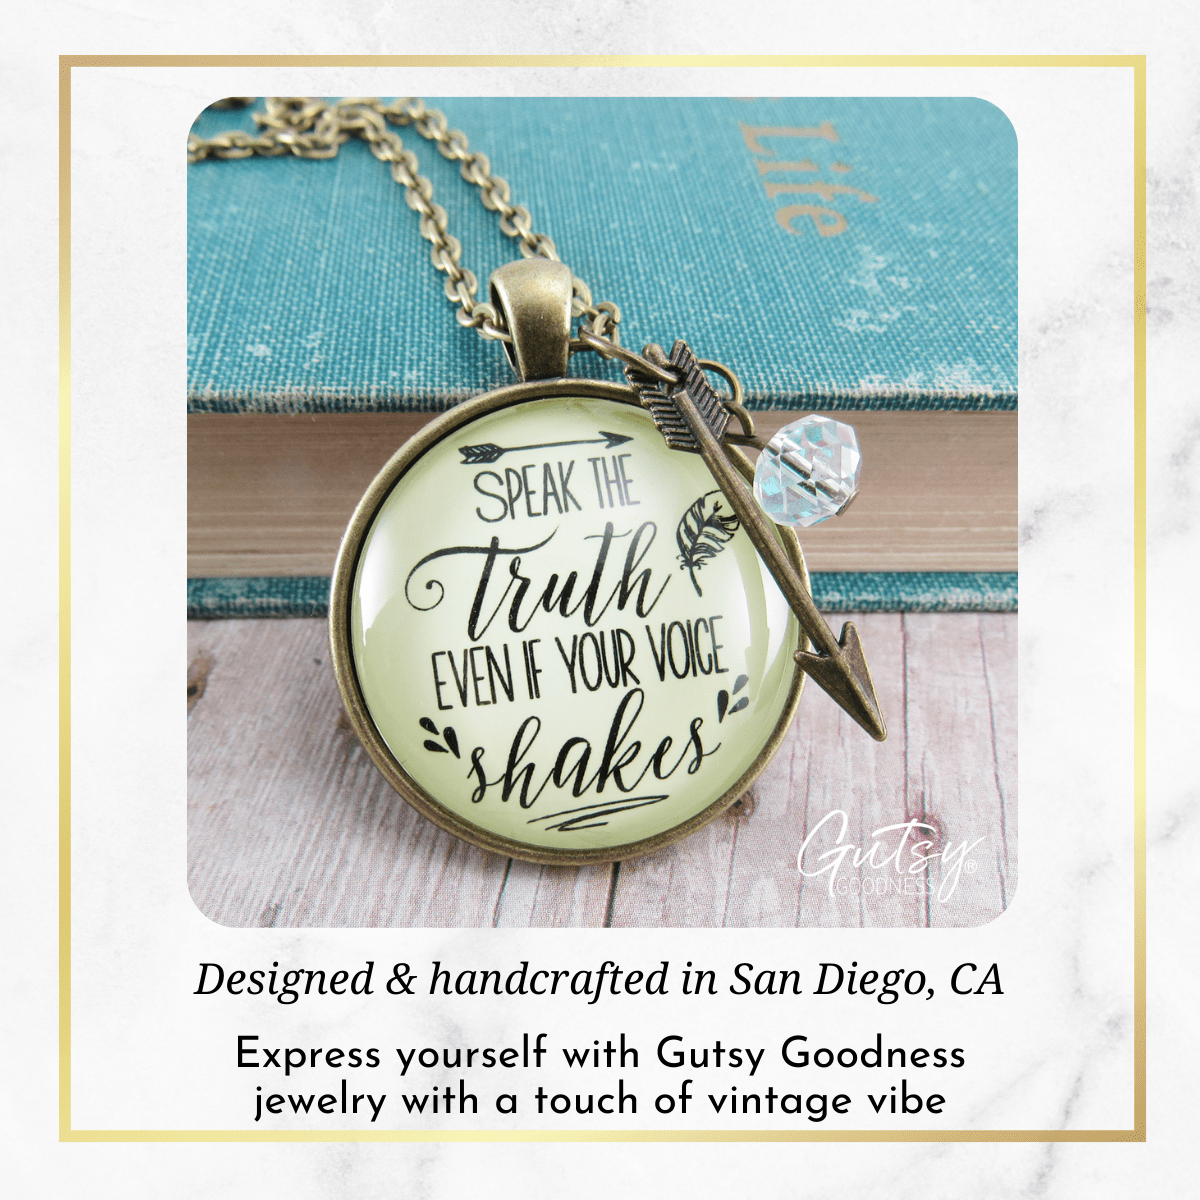 Gutsy Goodness Speak Truth Even Voice Shakes Necklace Brave Jewelry Message - Gutsy Goodness Handmade Jewelry;Speak Truth Even Voice Shakes Necklace Brave Jewelry Message - Gutsy Goodness Handmade Jewelry Gifts